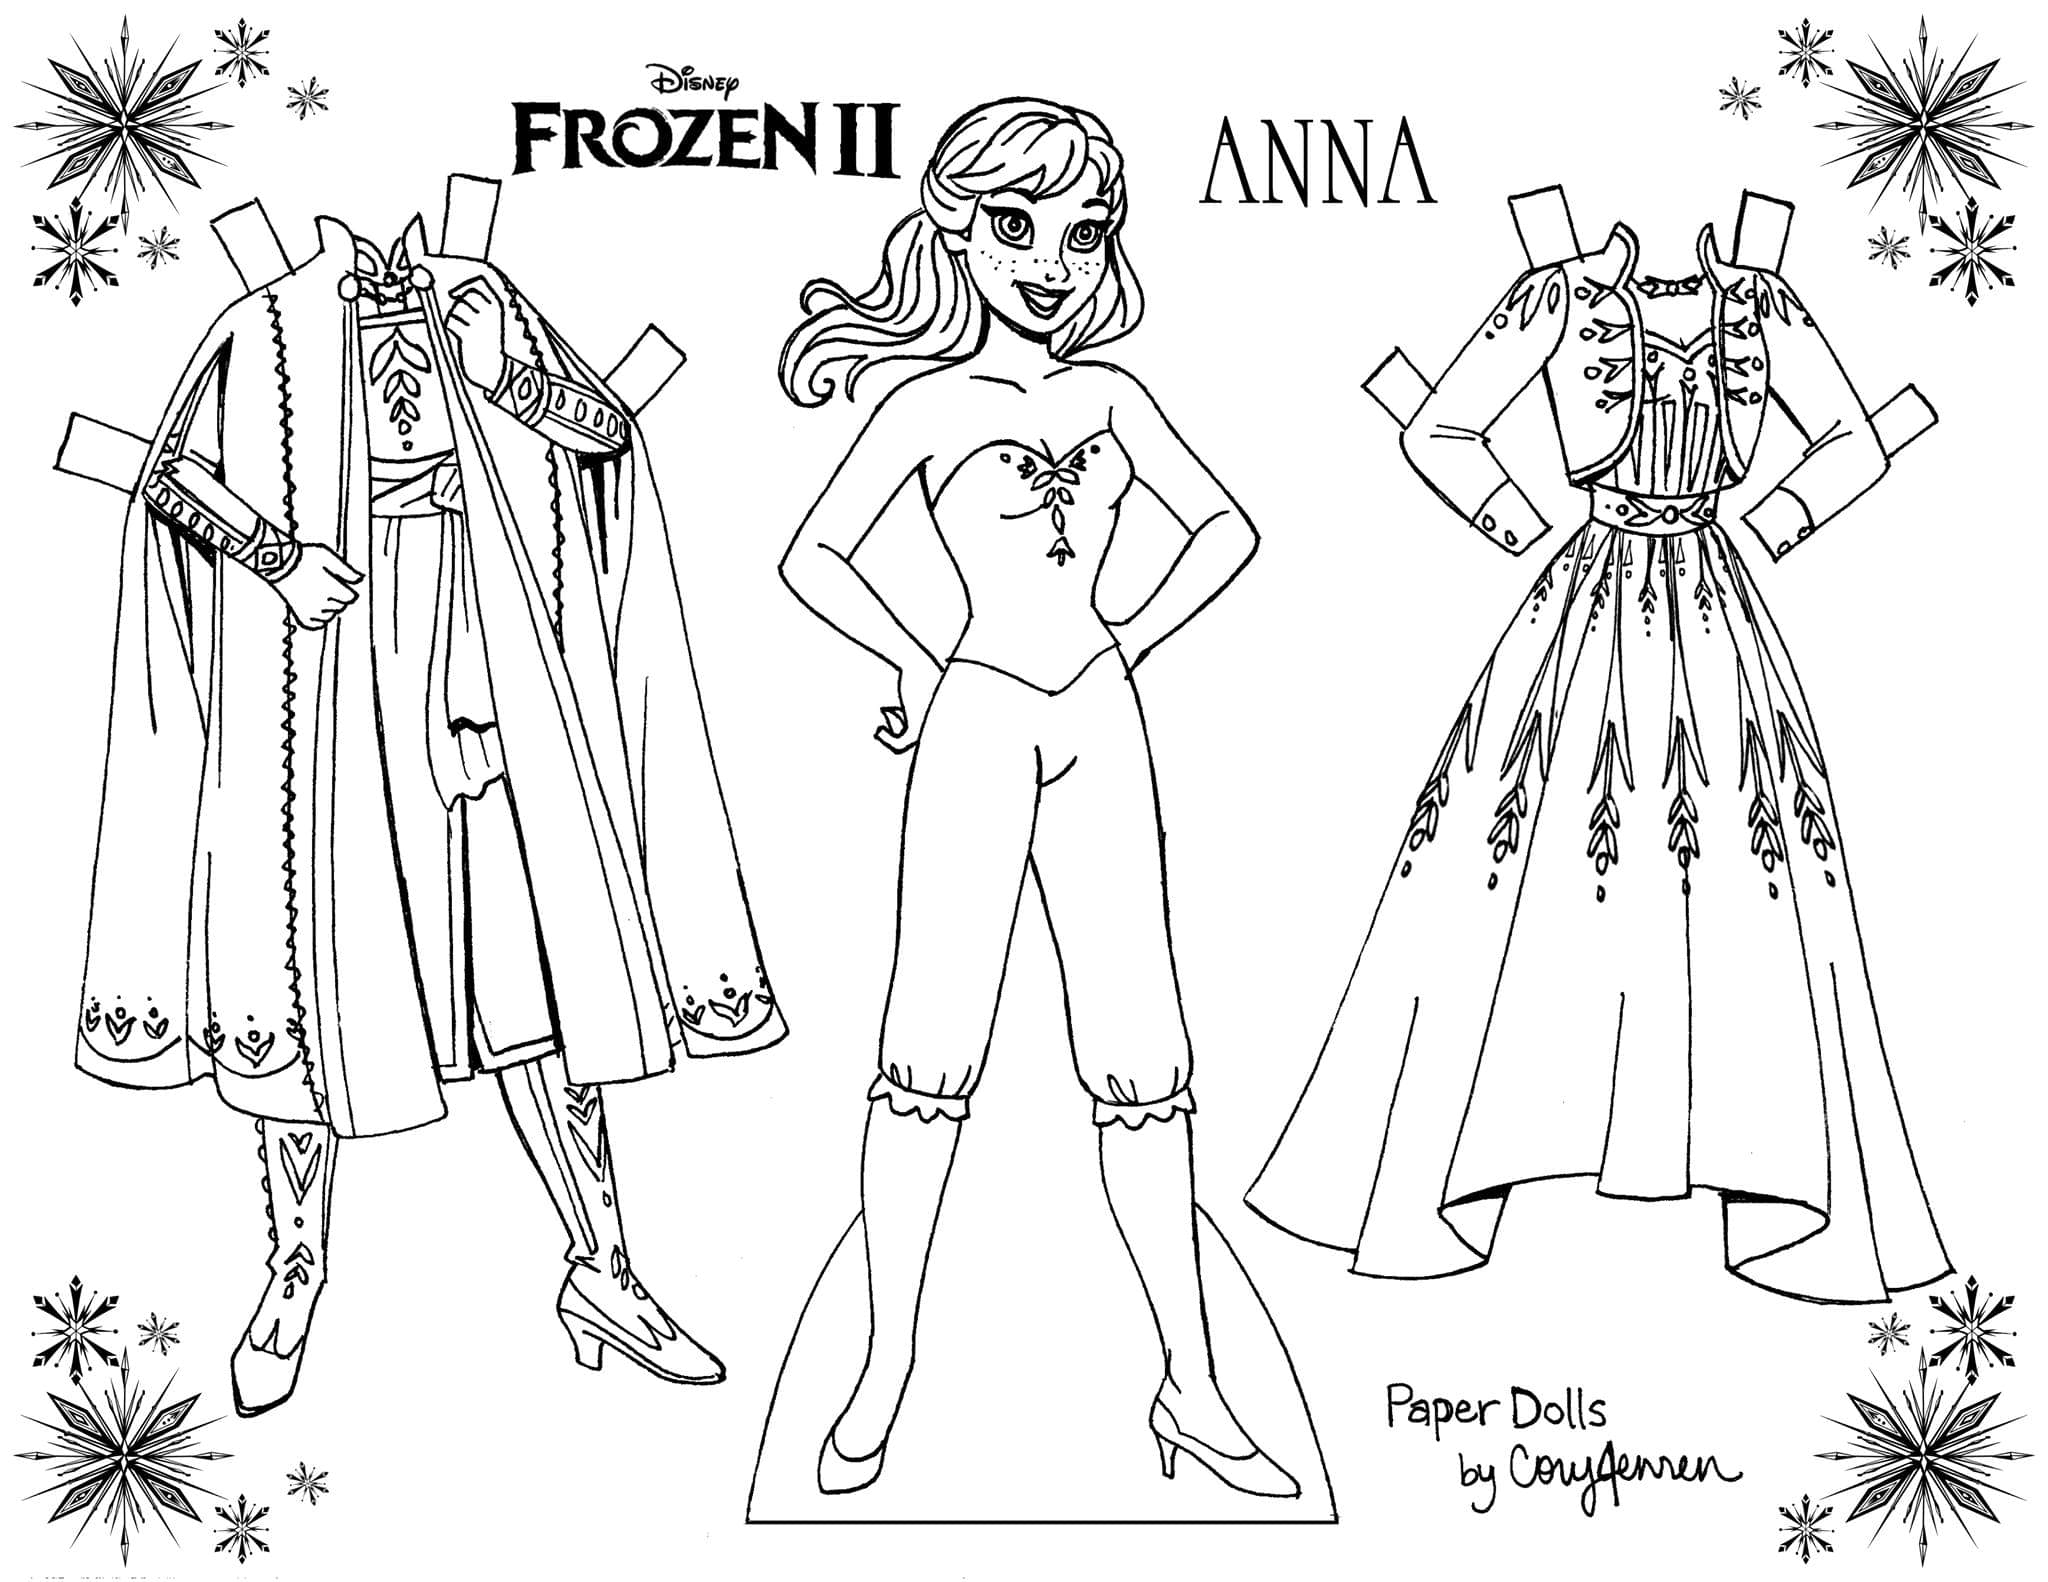 Frozen 2 coloring paper dolls of Elsa and Anna - YouLoveIt.com